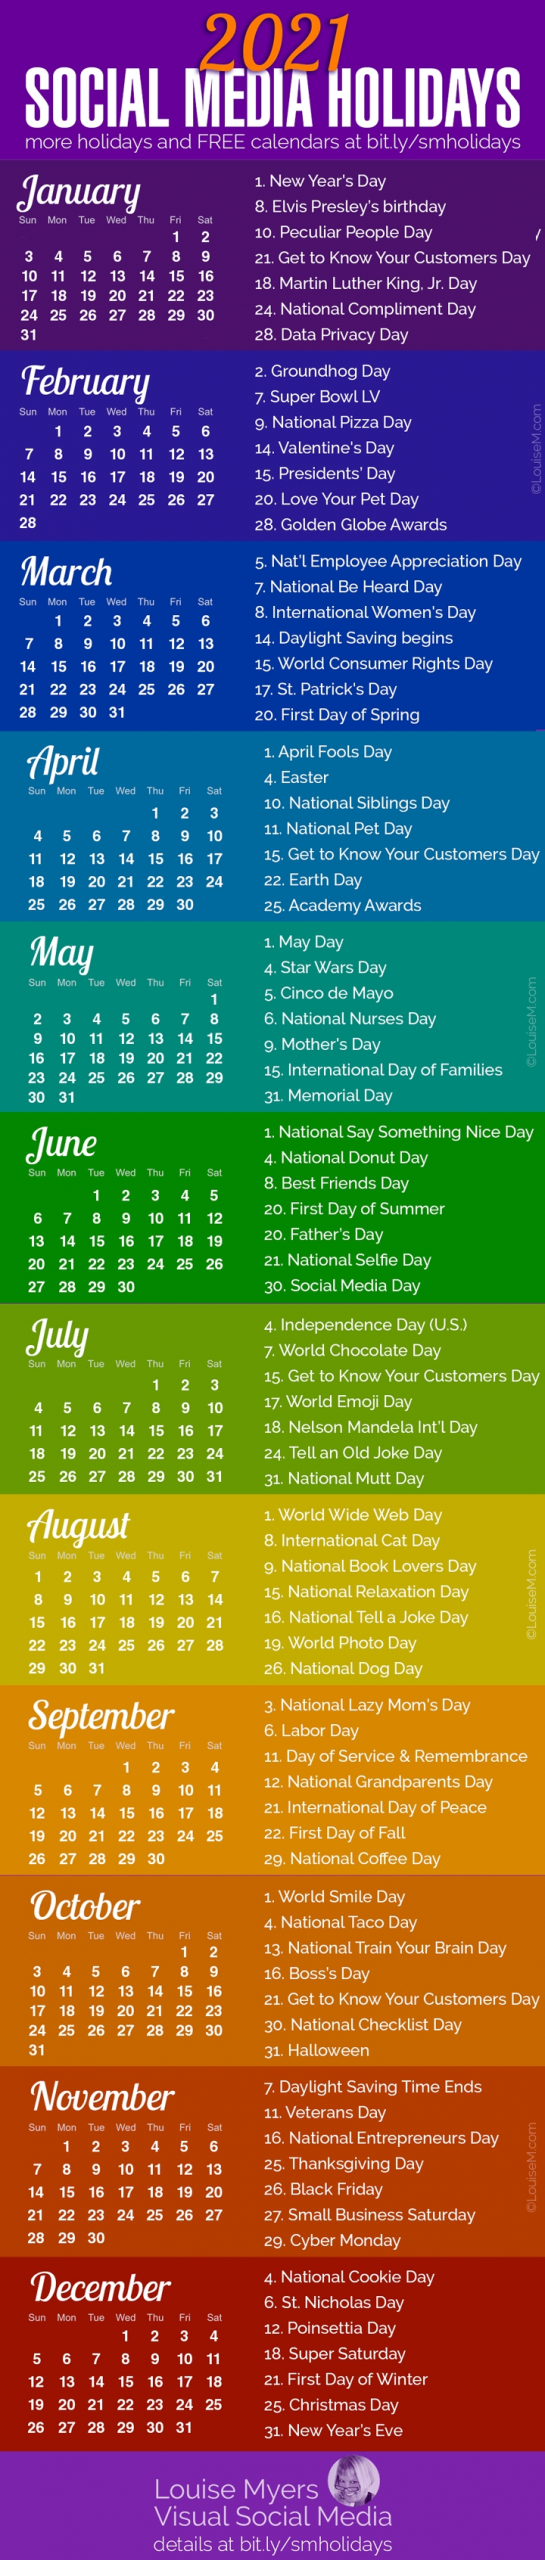 100+ Social Media Holidays You Need In 2020-21: Indispensable!